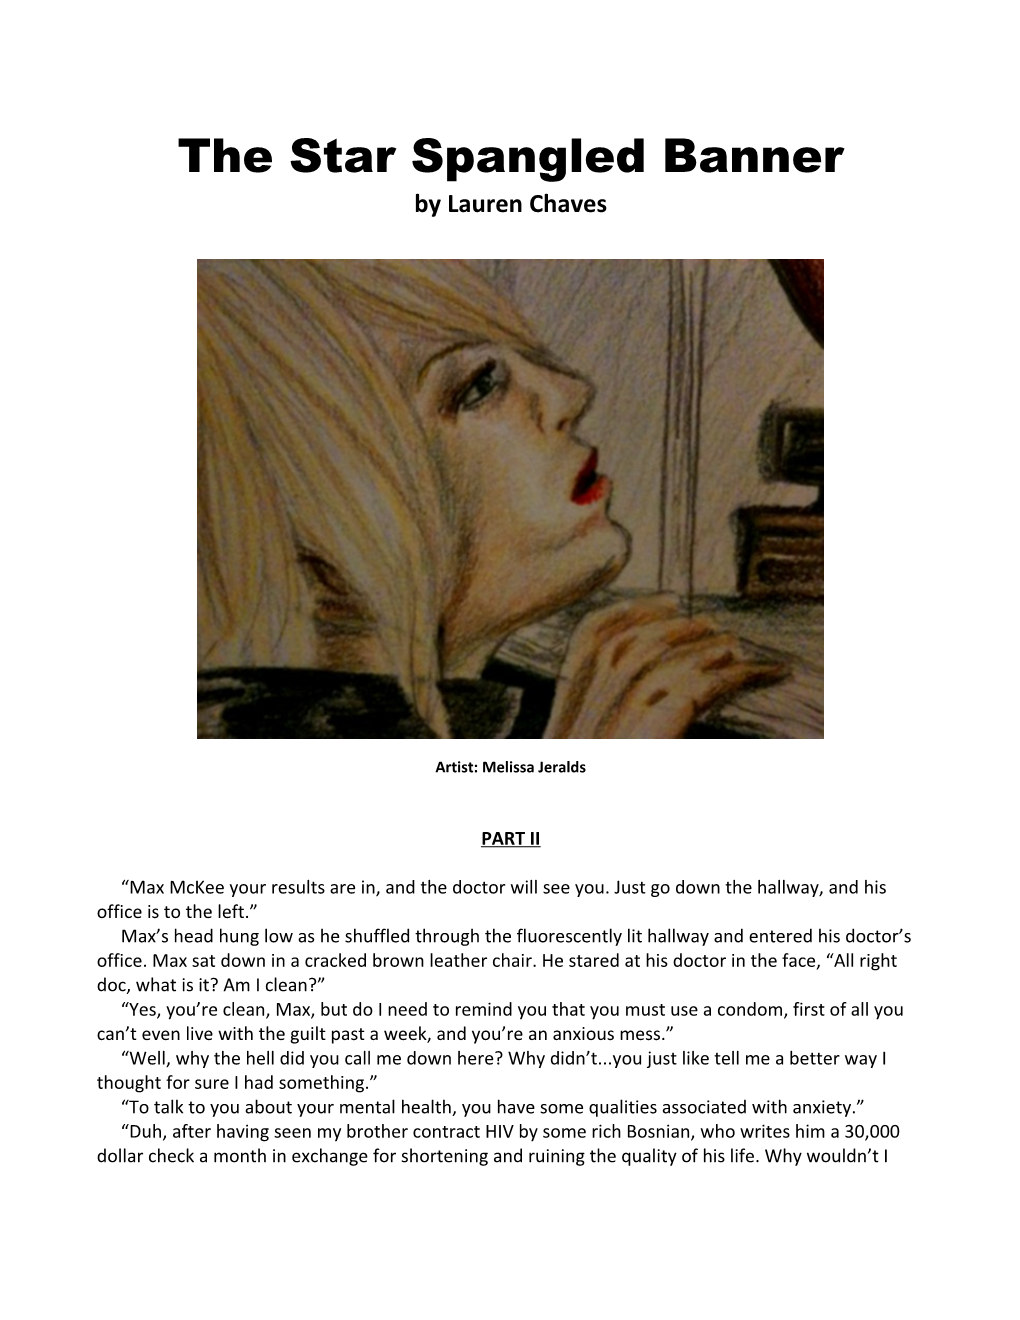 The Star Spangled Banner by Lauren Chaves